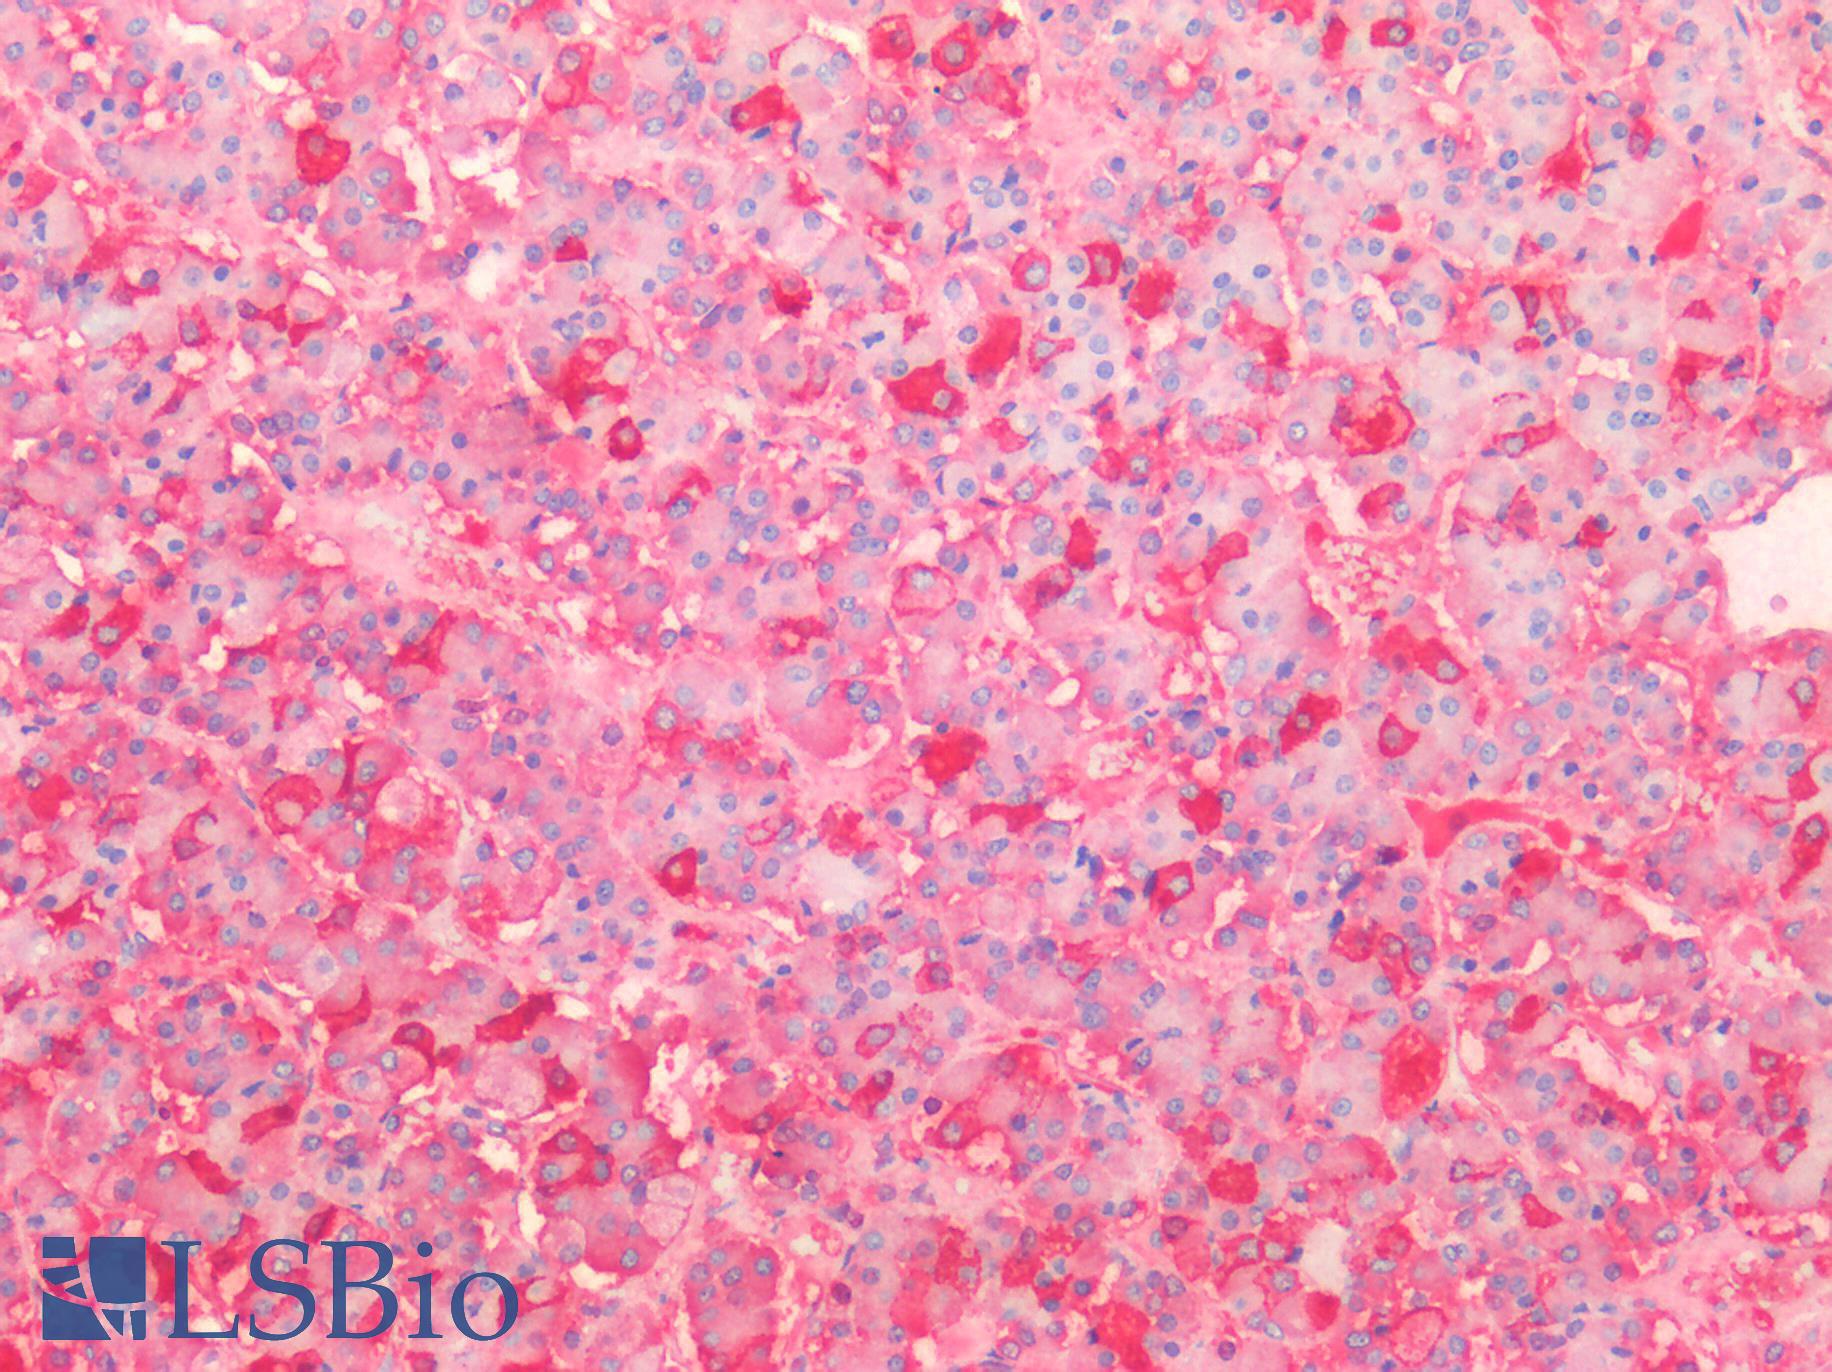 FSH Antibody - Human Pituitary: Formalin-Fixed, Paraffin-Embedded (FFPE)